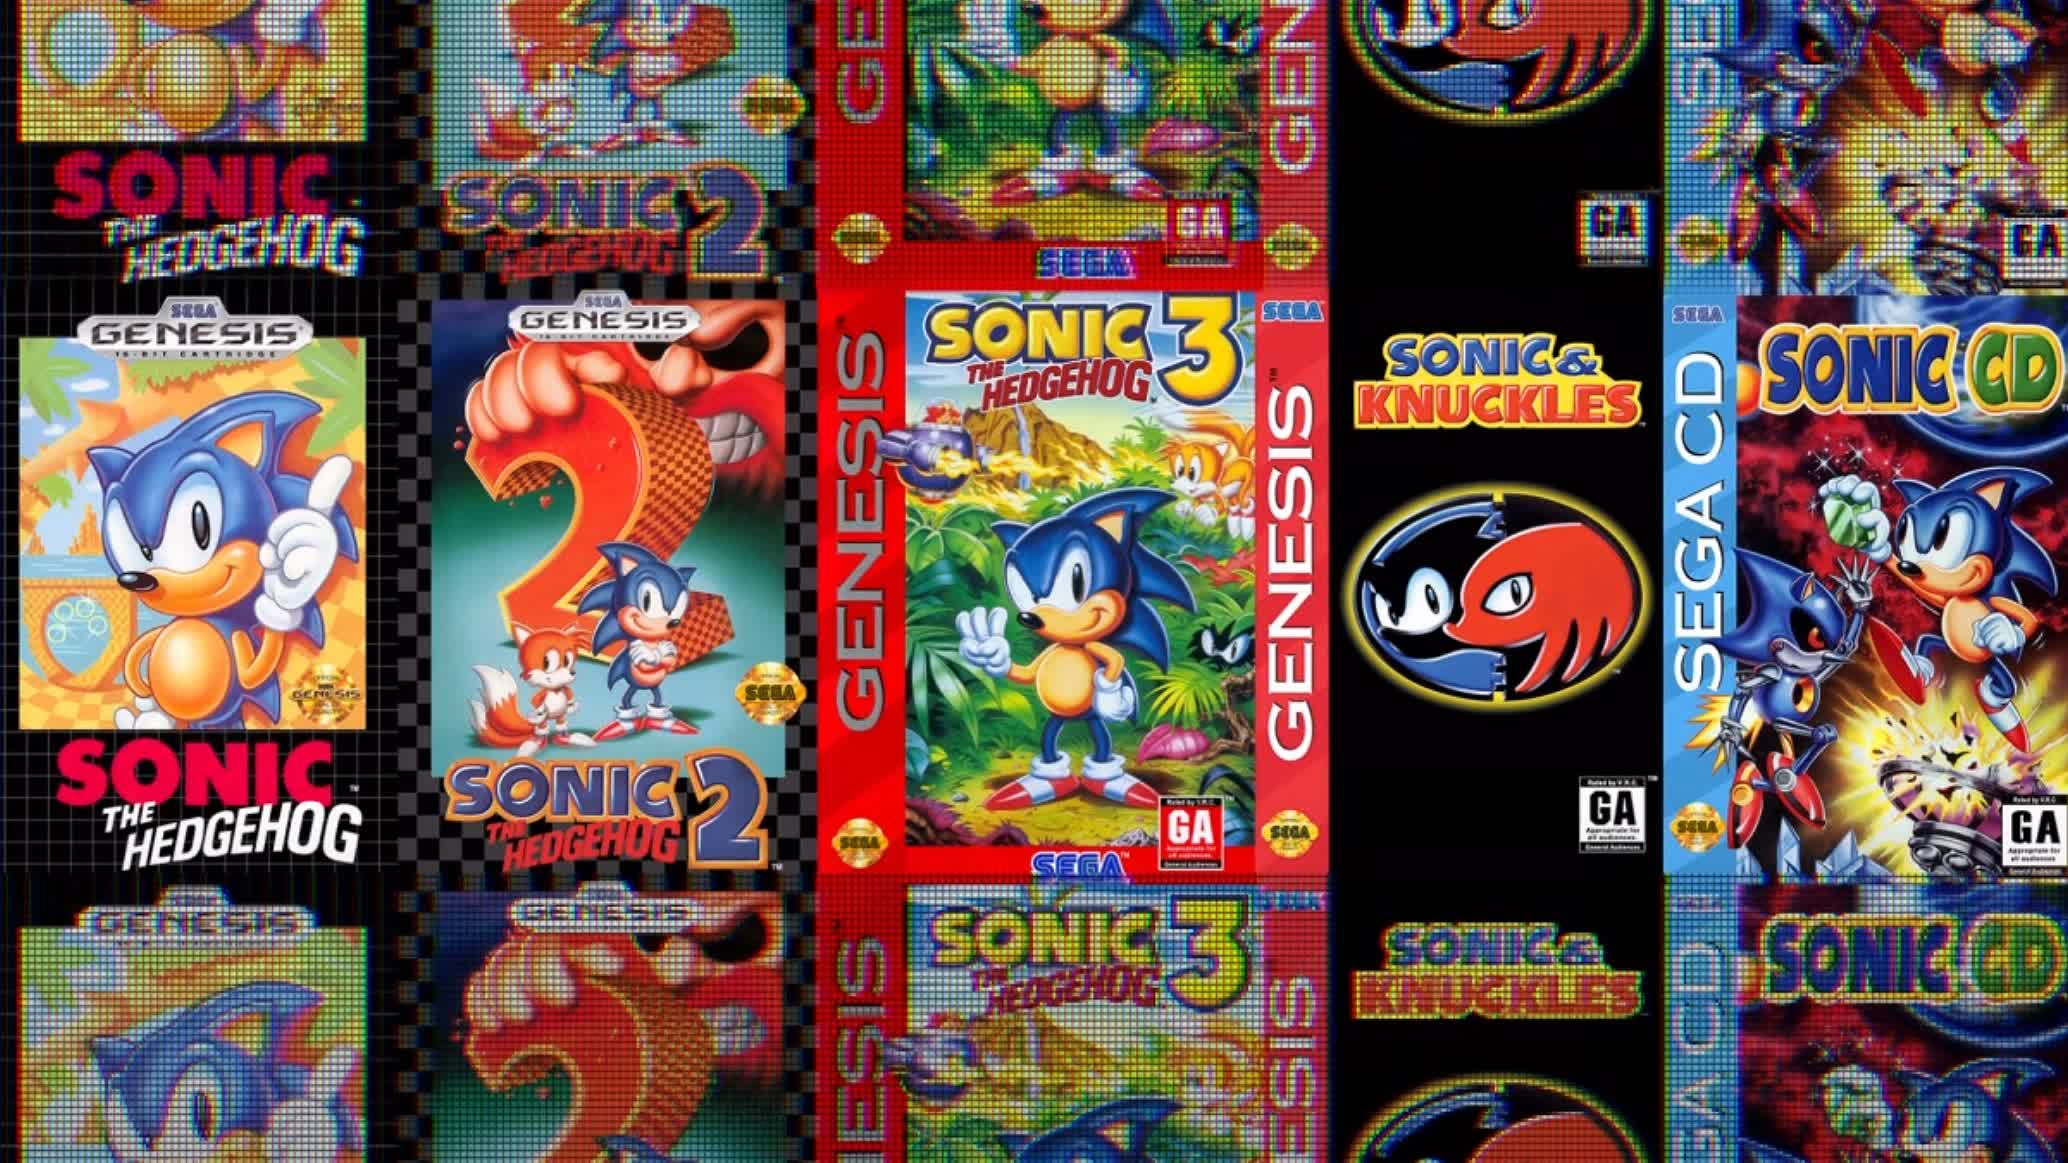 Sega is bundling five classic Sonic the Hedgehog games into a new compilation called Sonic Origins